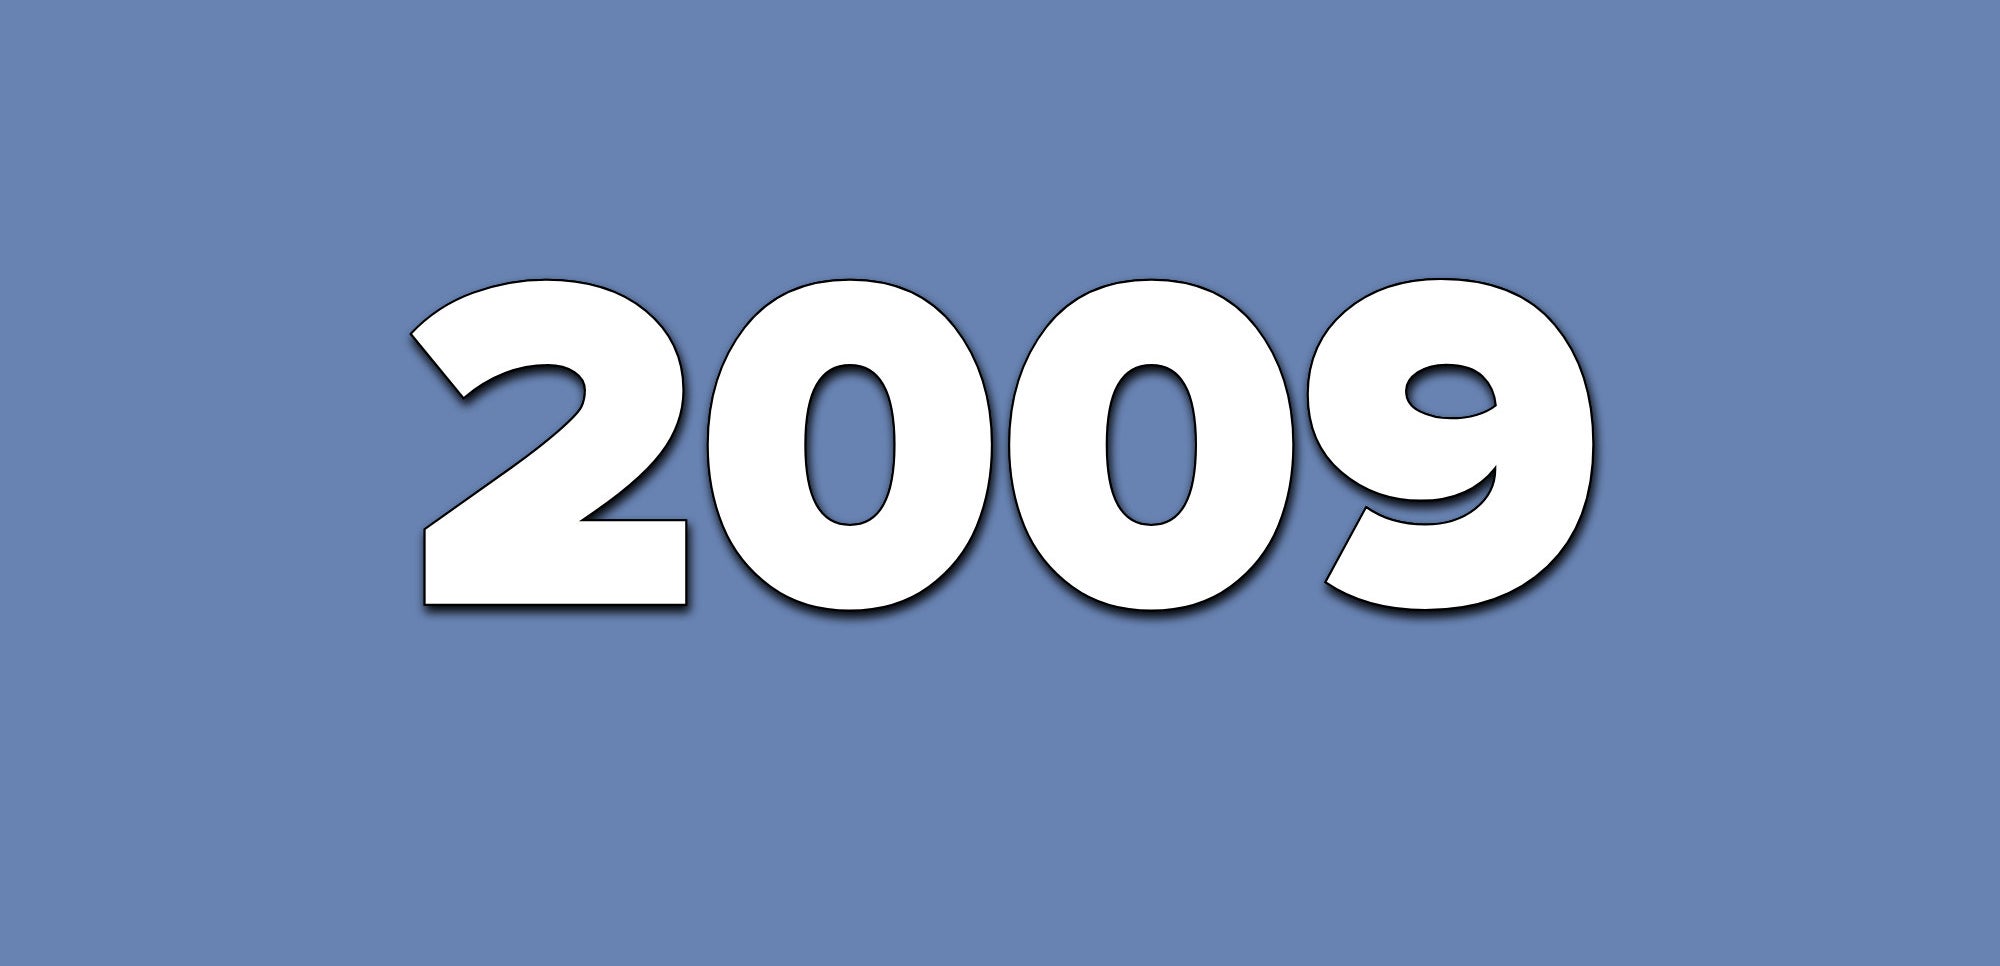 A blue background with text that says 2009